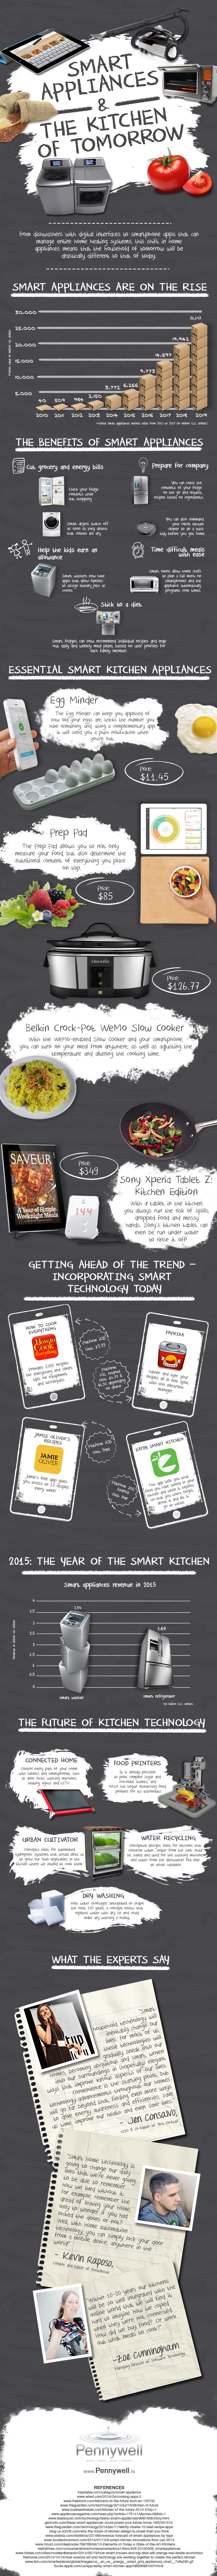 Smart Appliances and Kitchen of Tomorrow Infographic